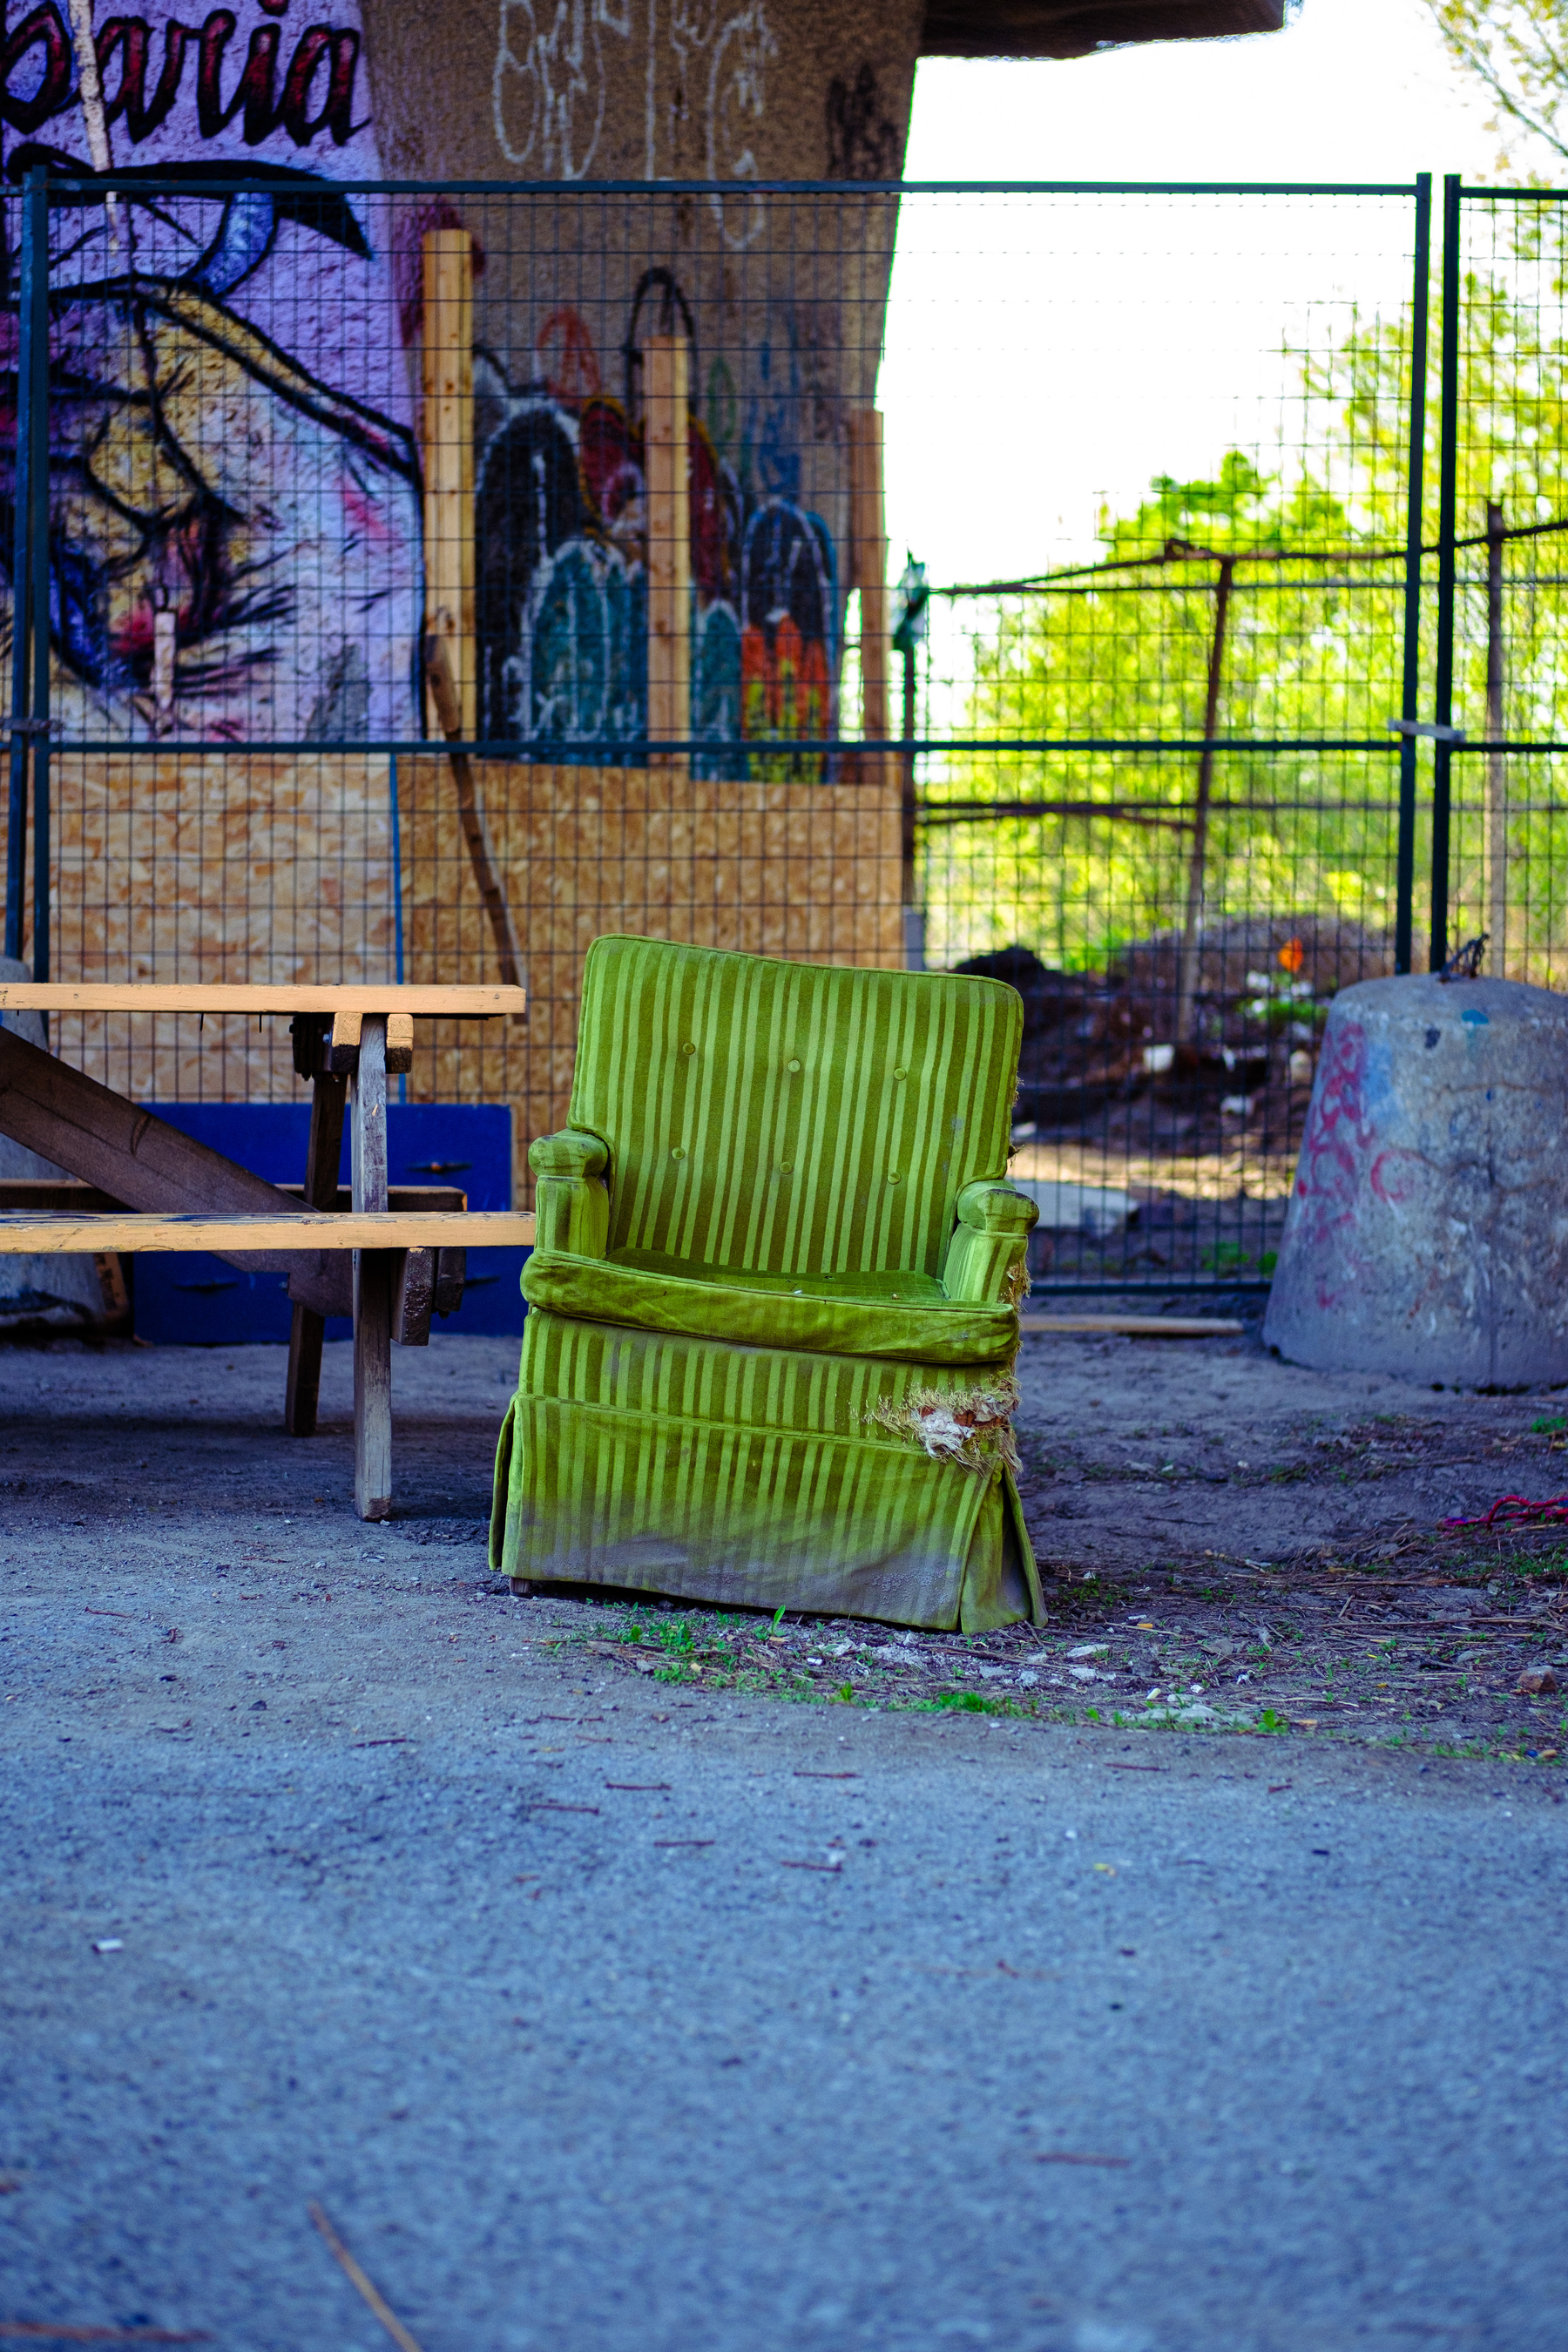 A scruffy discarded chair was left under a bridge in Montreal. It really did have that venomous green look.